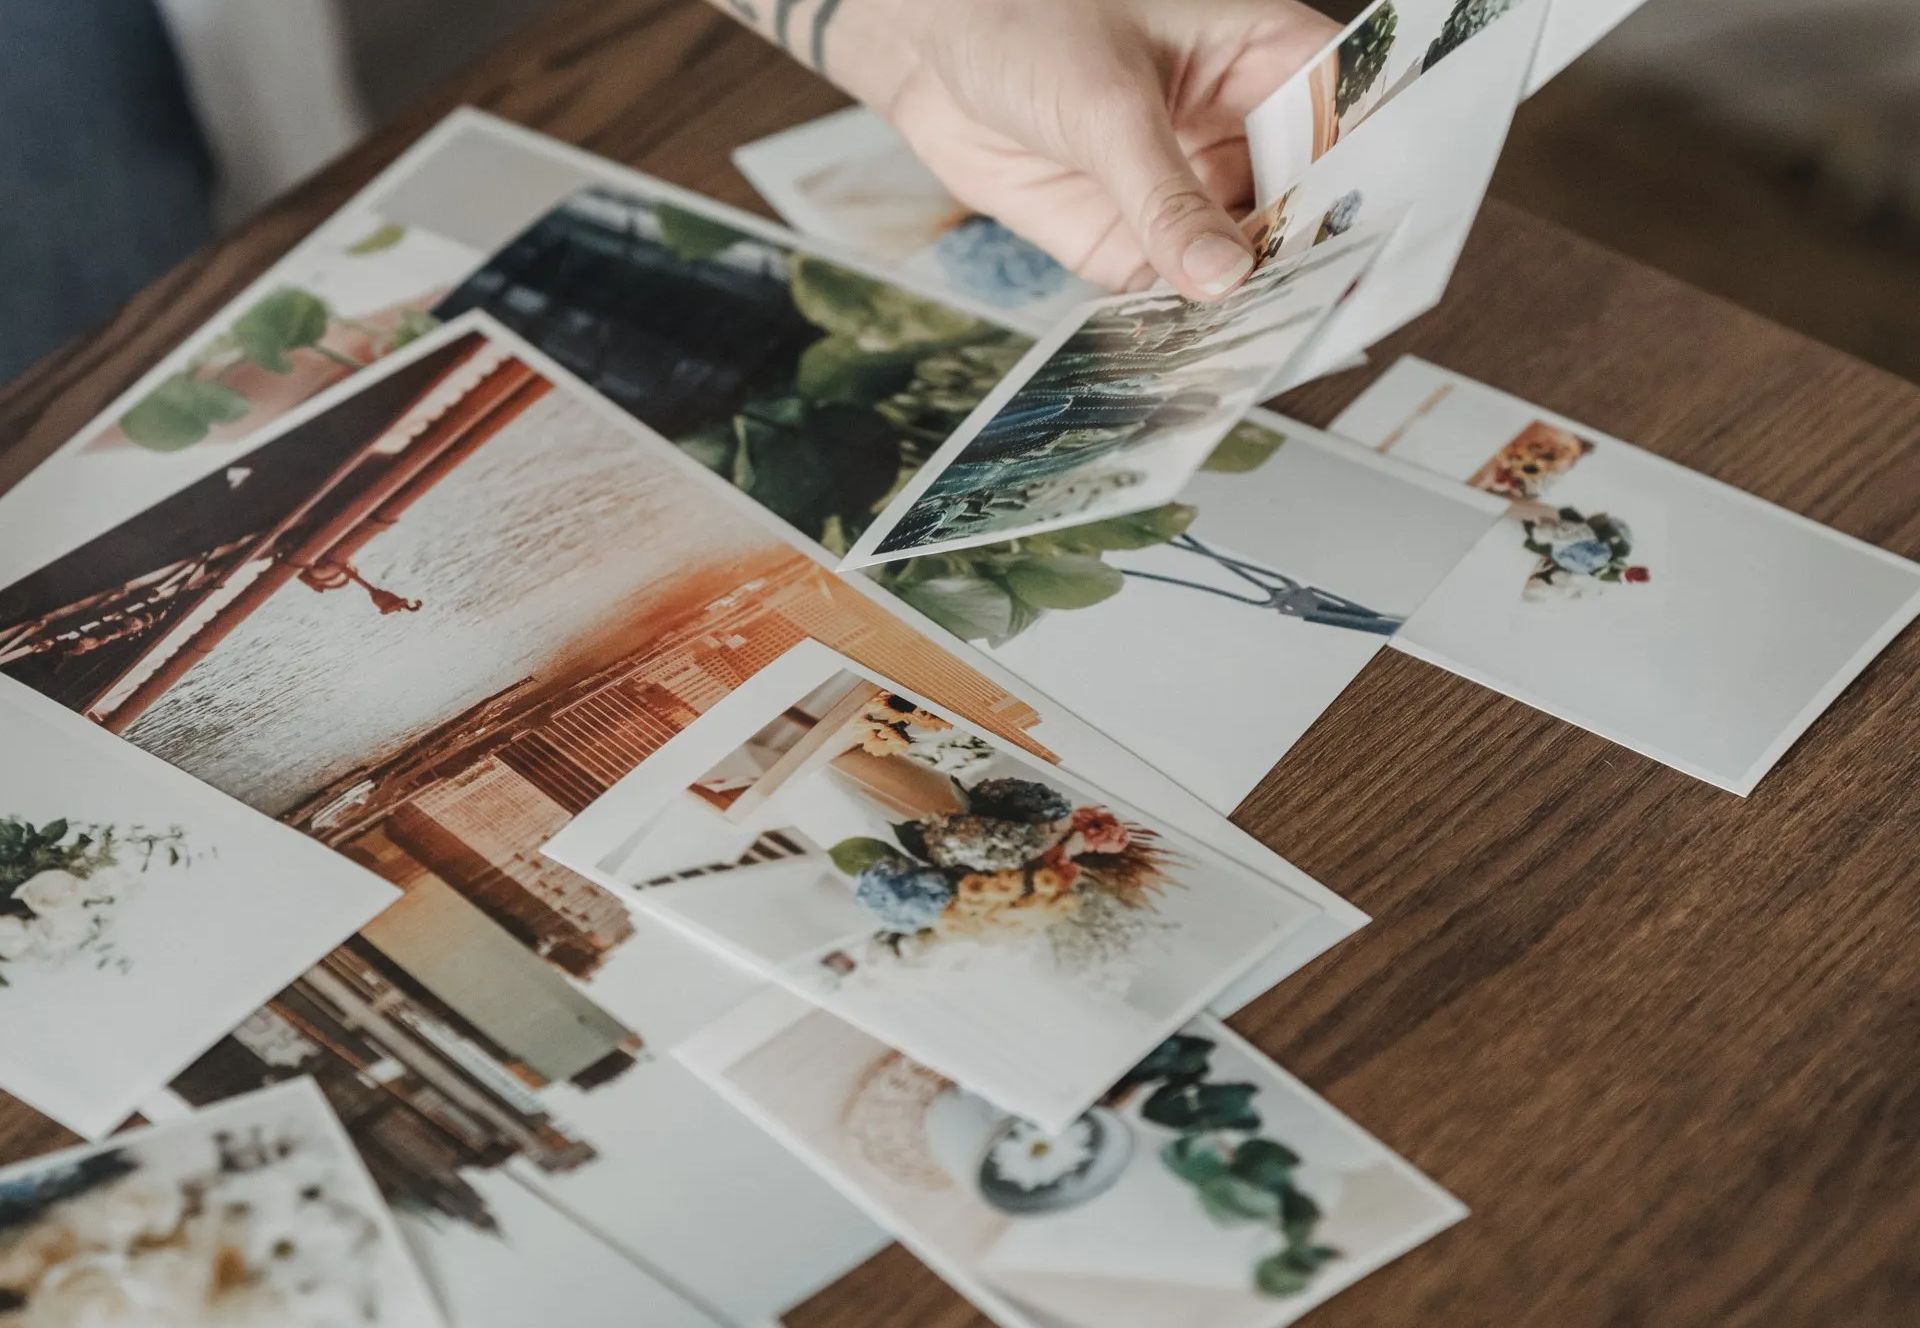 a person is holding a picture over a pile of pictures on a table .